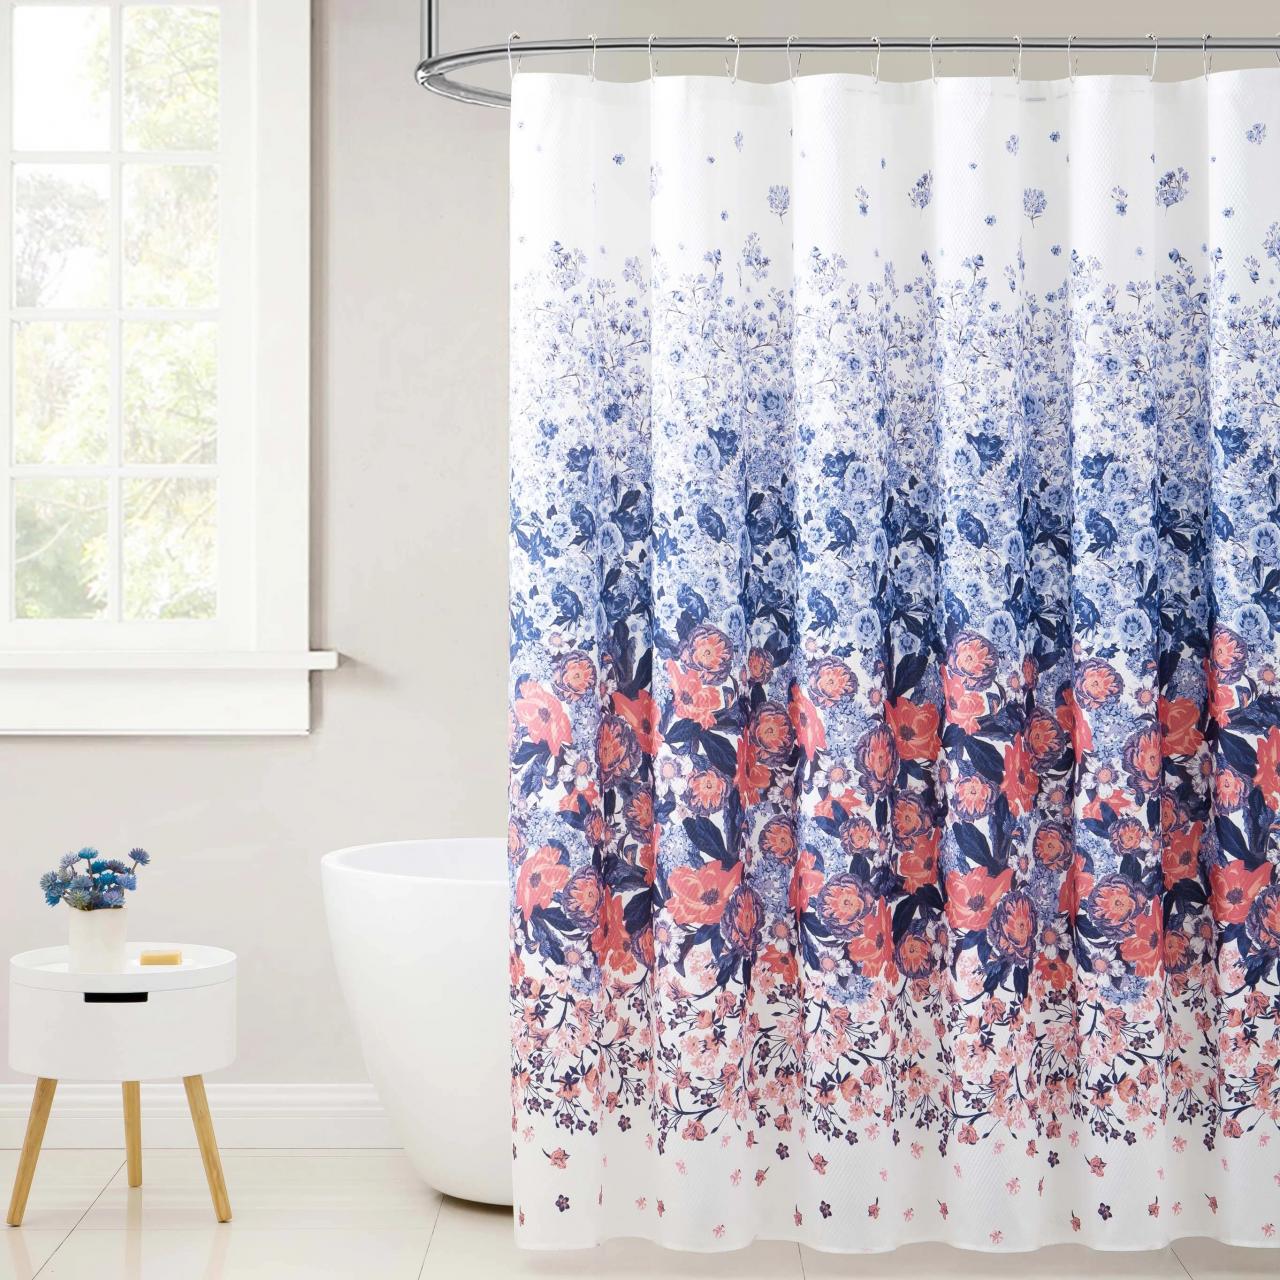 Fabric Shower Curtain for Bathroom White with Navy and Orange Coral